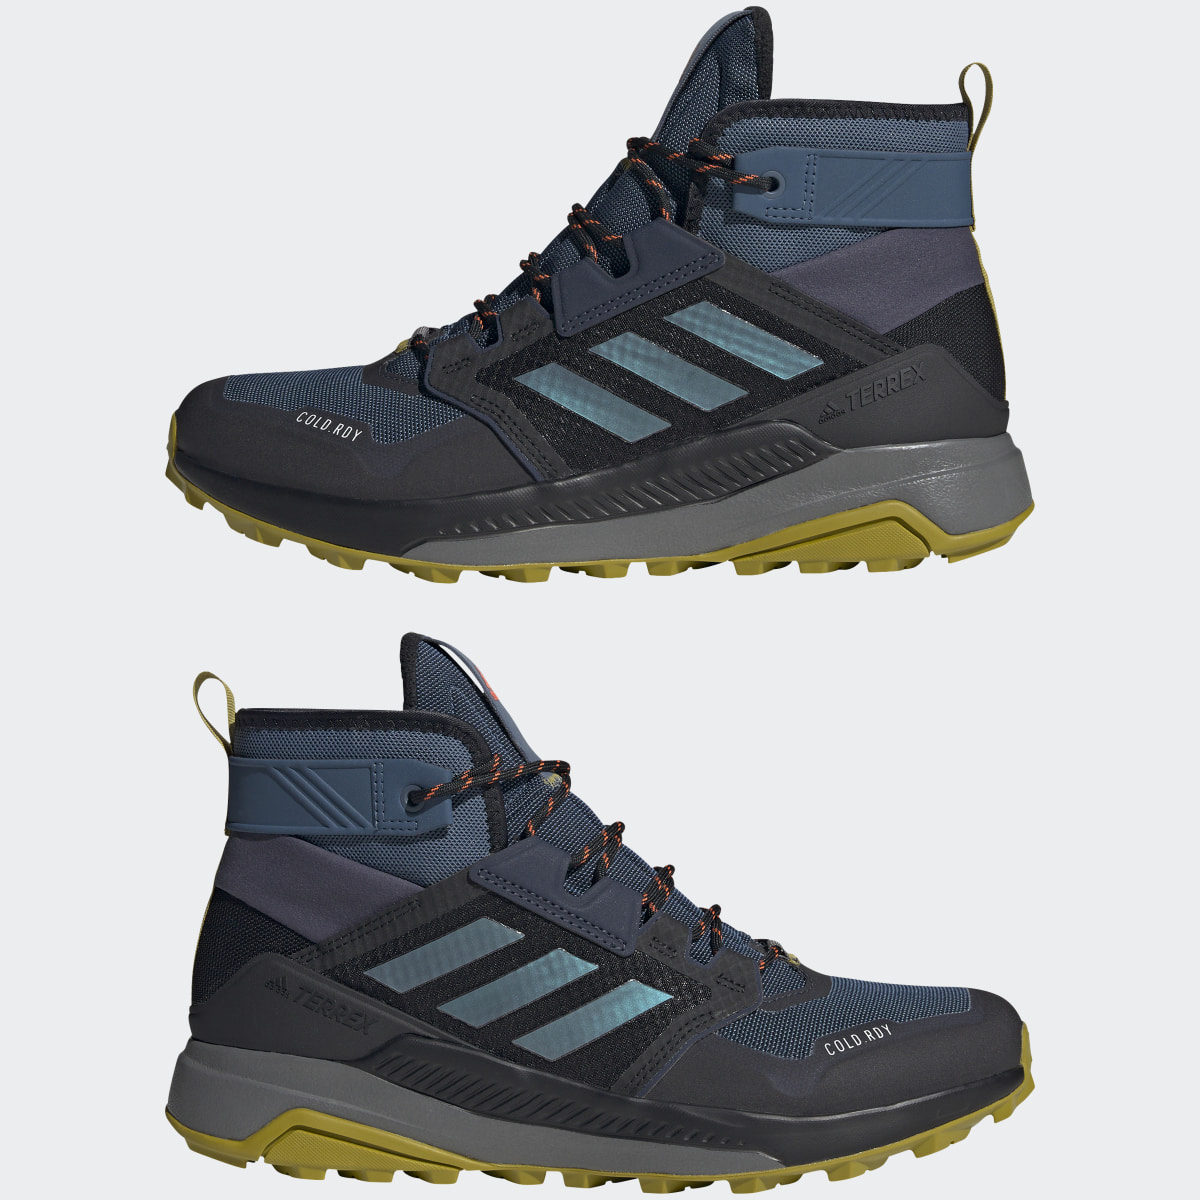 Adidas Terrex Trailmaker Mid COLD.RDY Hiking Boots. 8